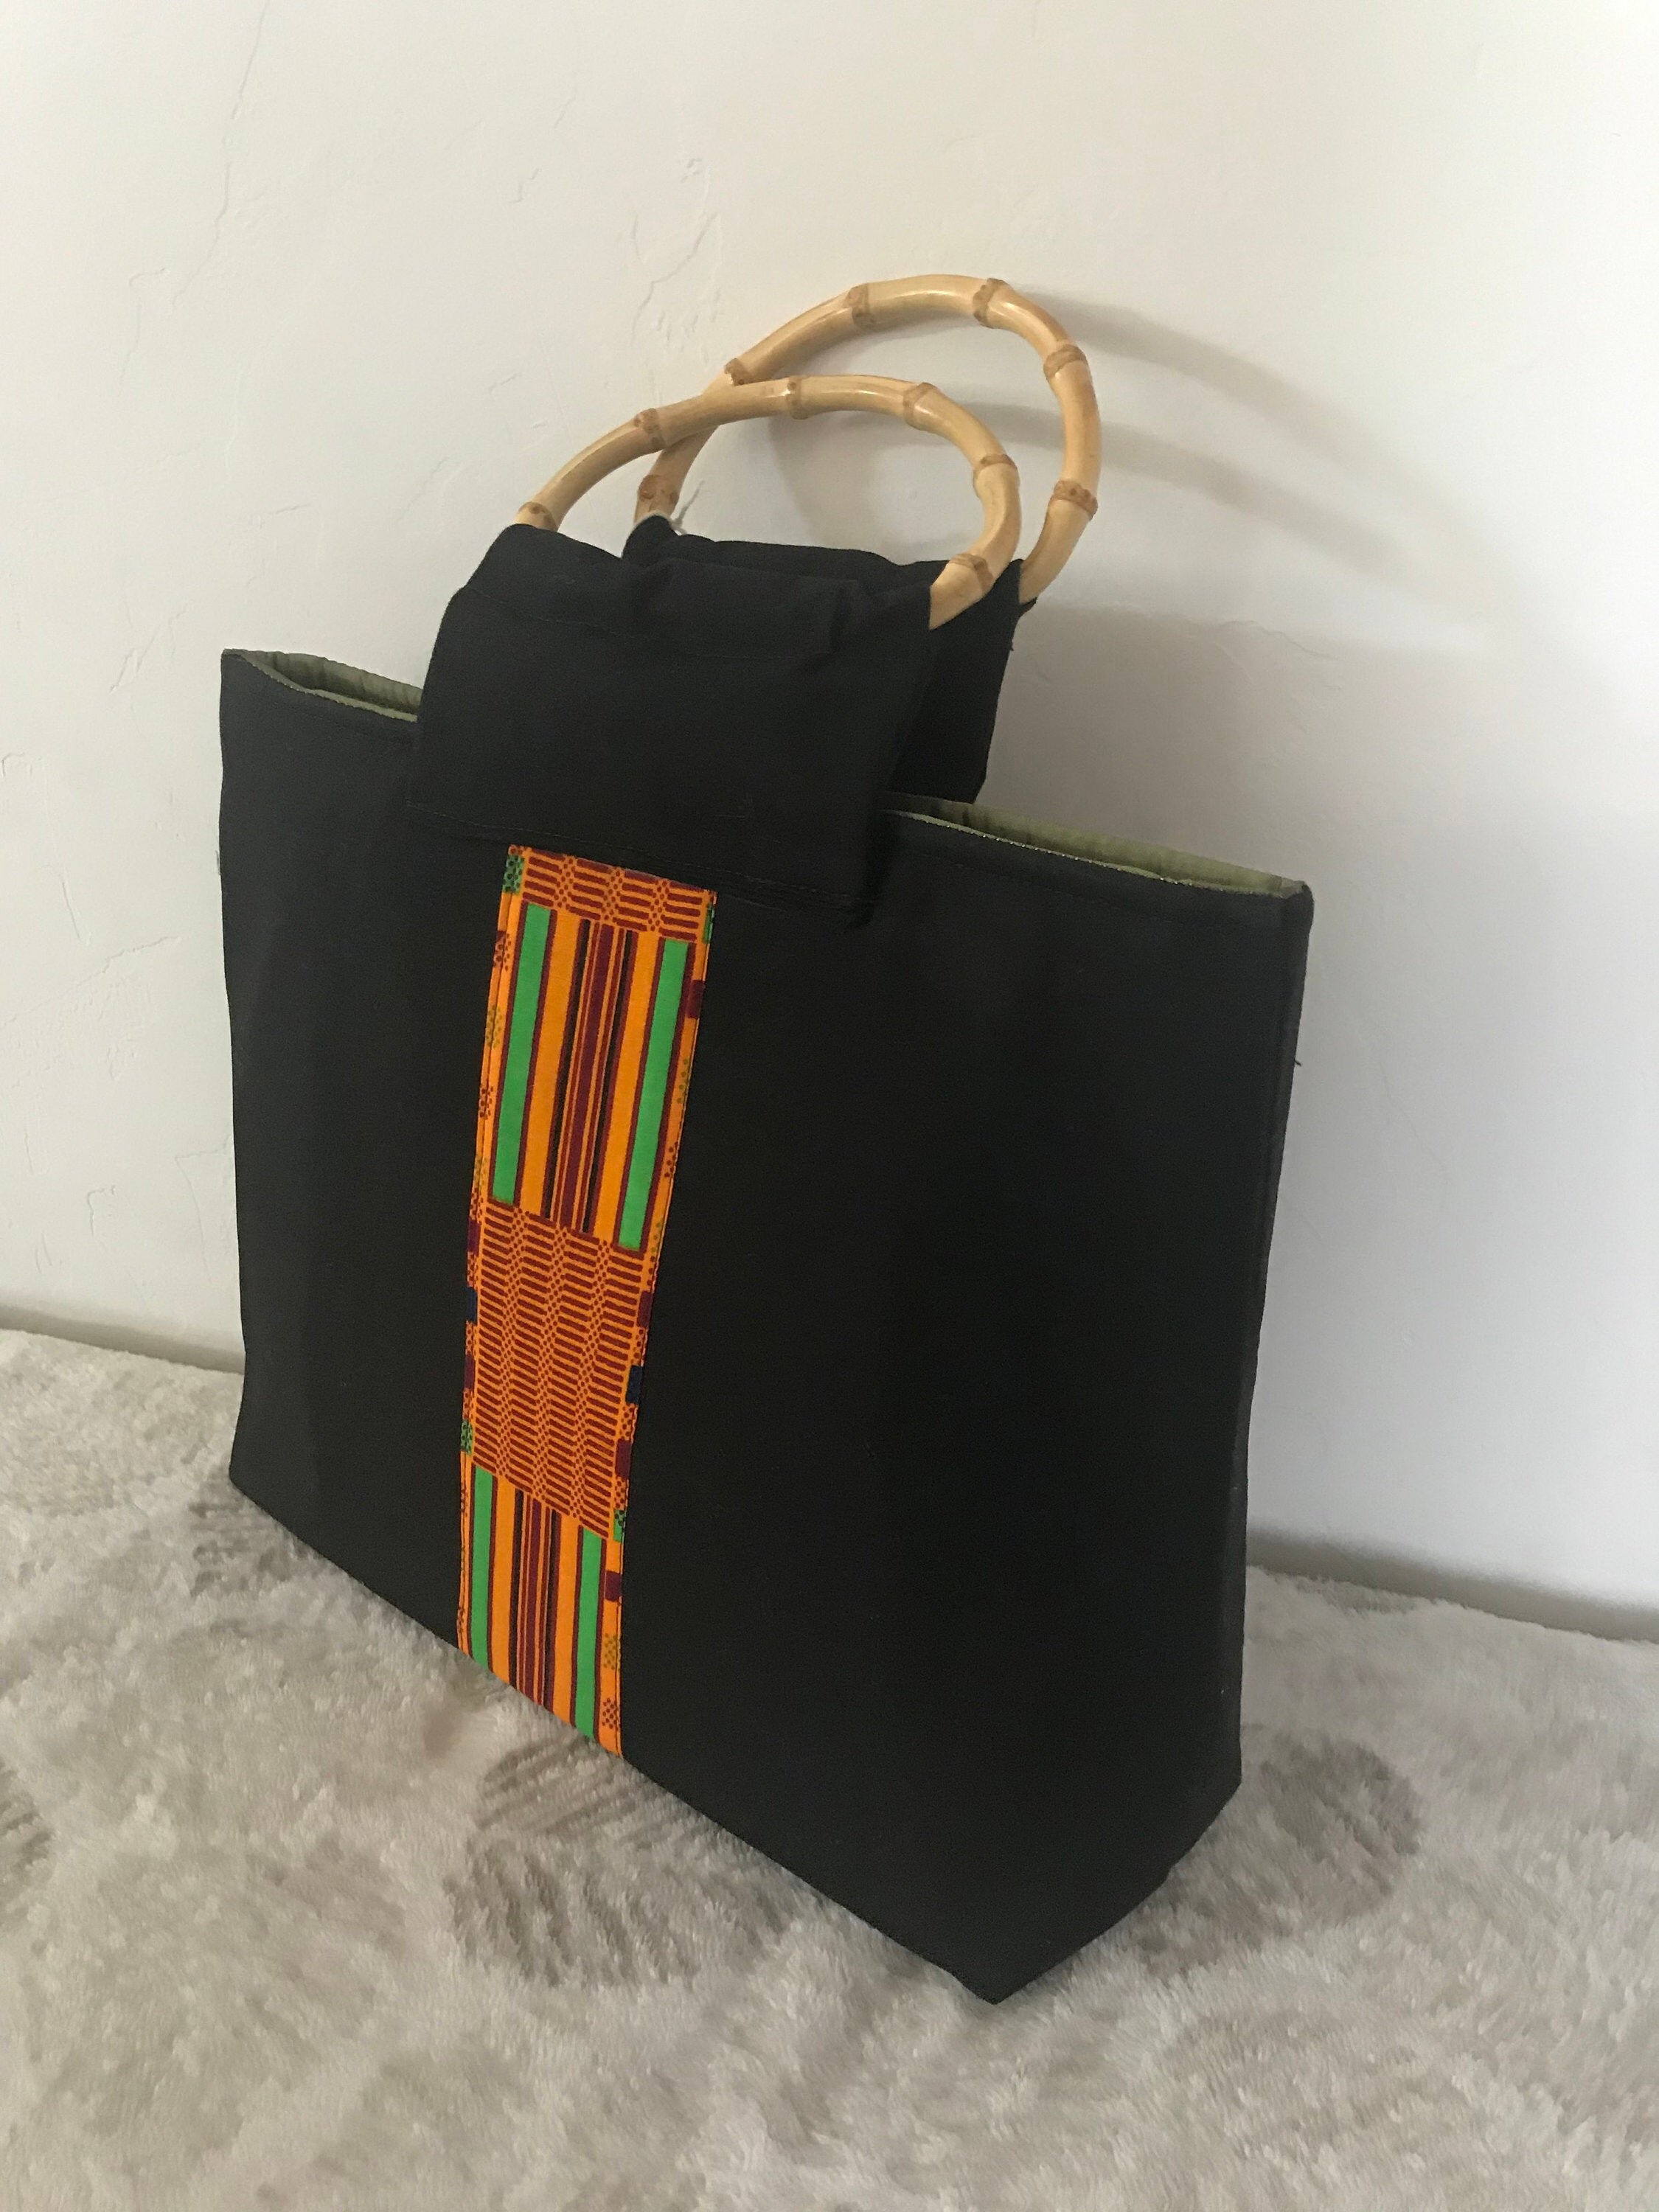 This Designer Has Been Running a Successful Handmade Bag Business for Over  25 Years - Artisan Joy